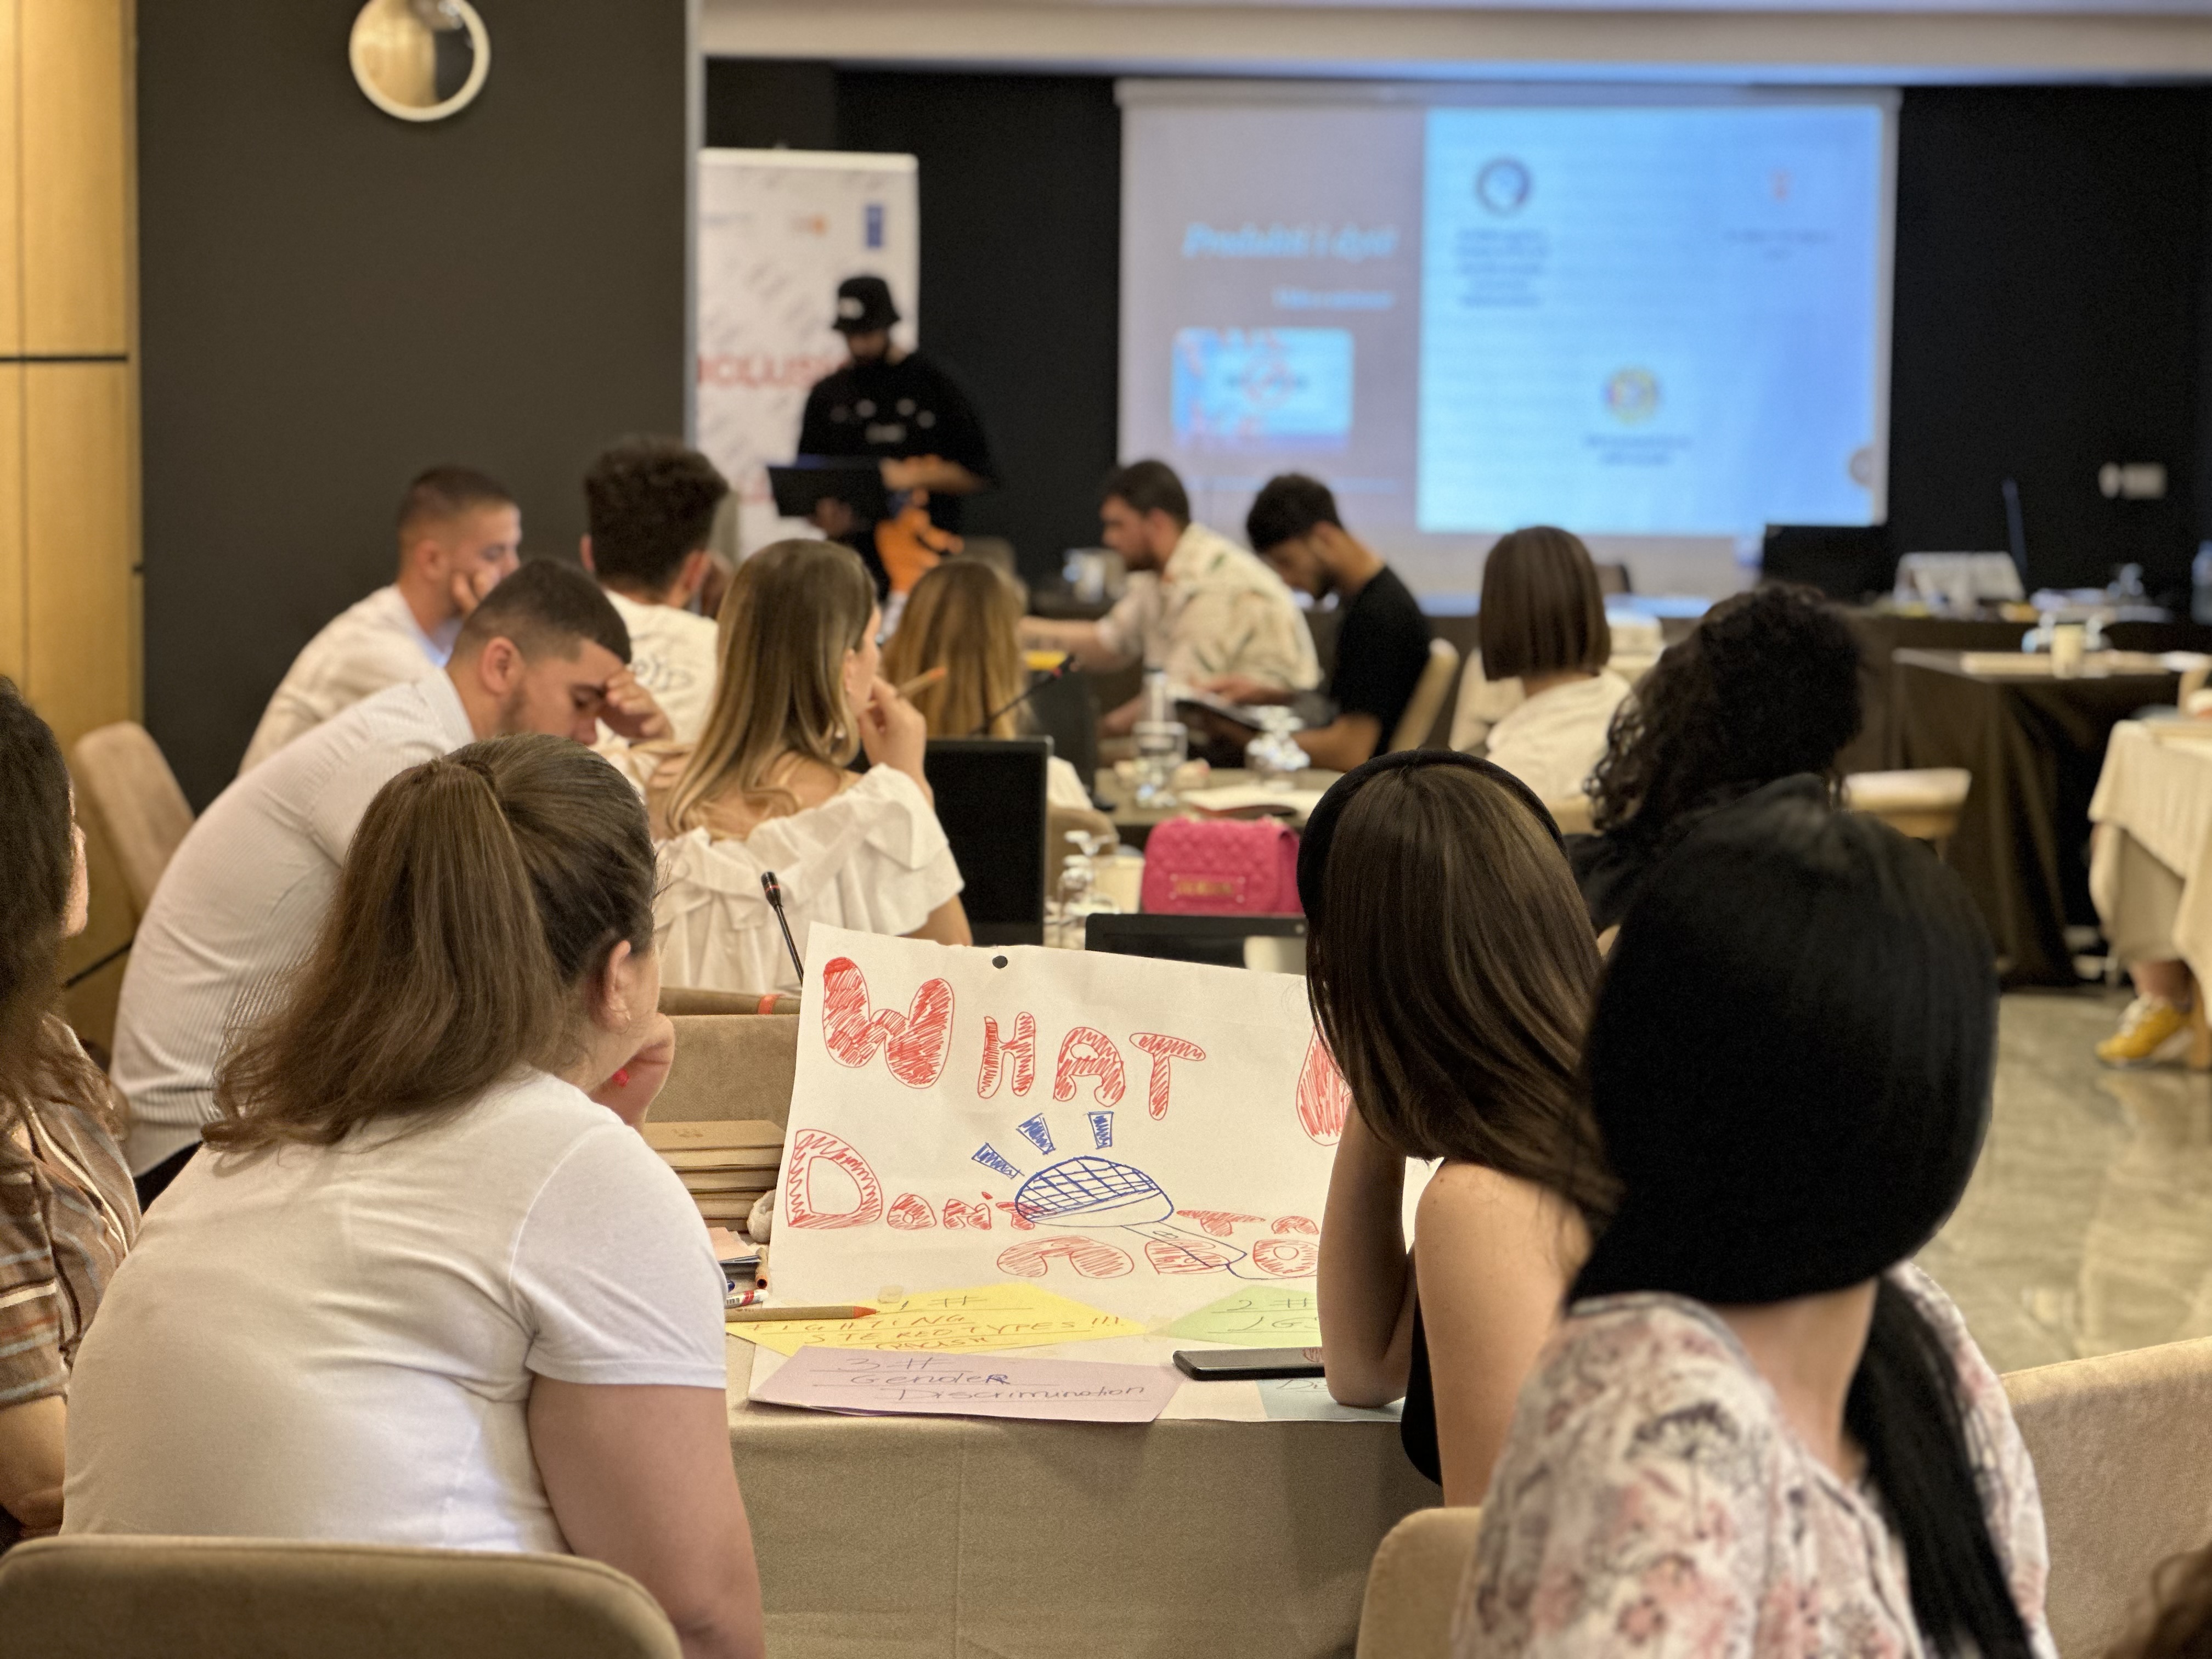 Two innovation boot camps provided a platform for around 100 young minds to showcase and compete with their project ideas dedicated to countering the scourge of hate speech. 